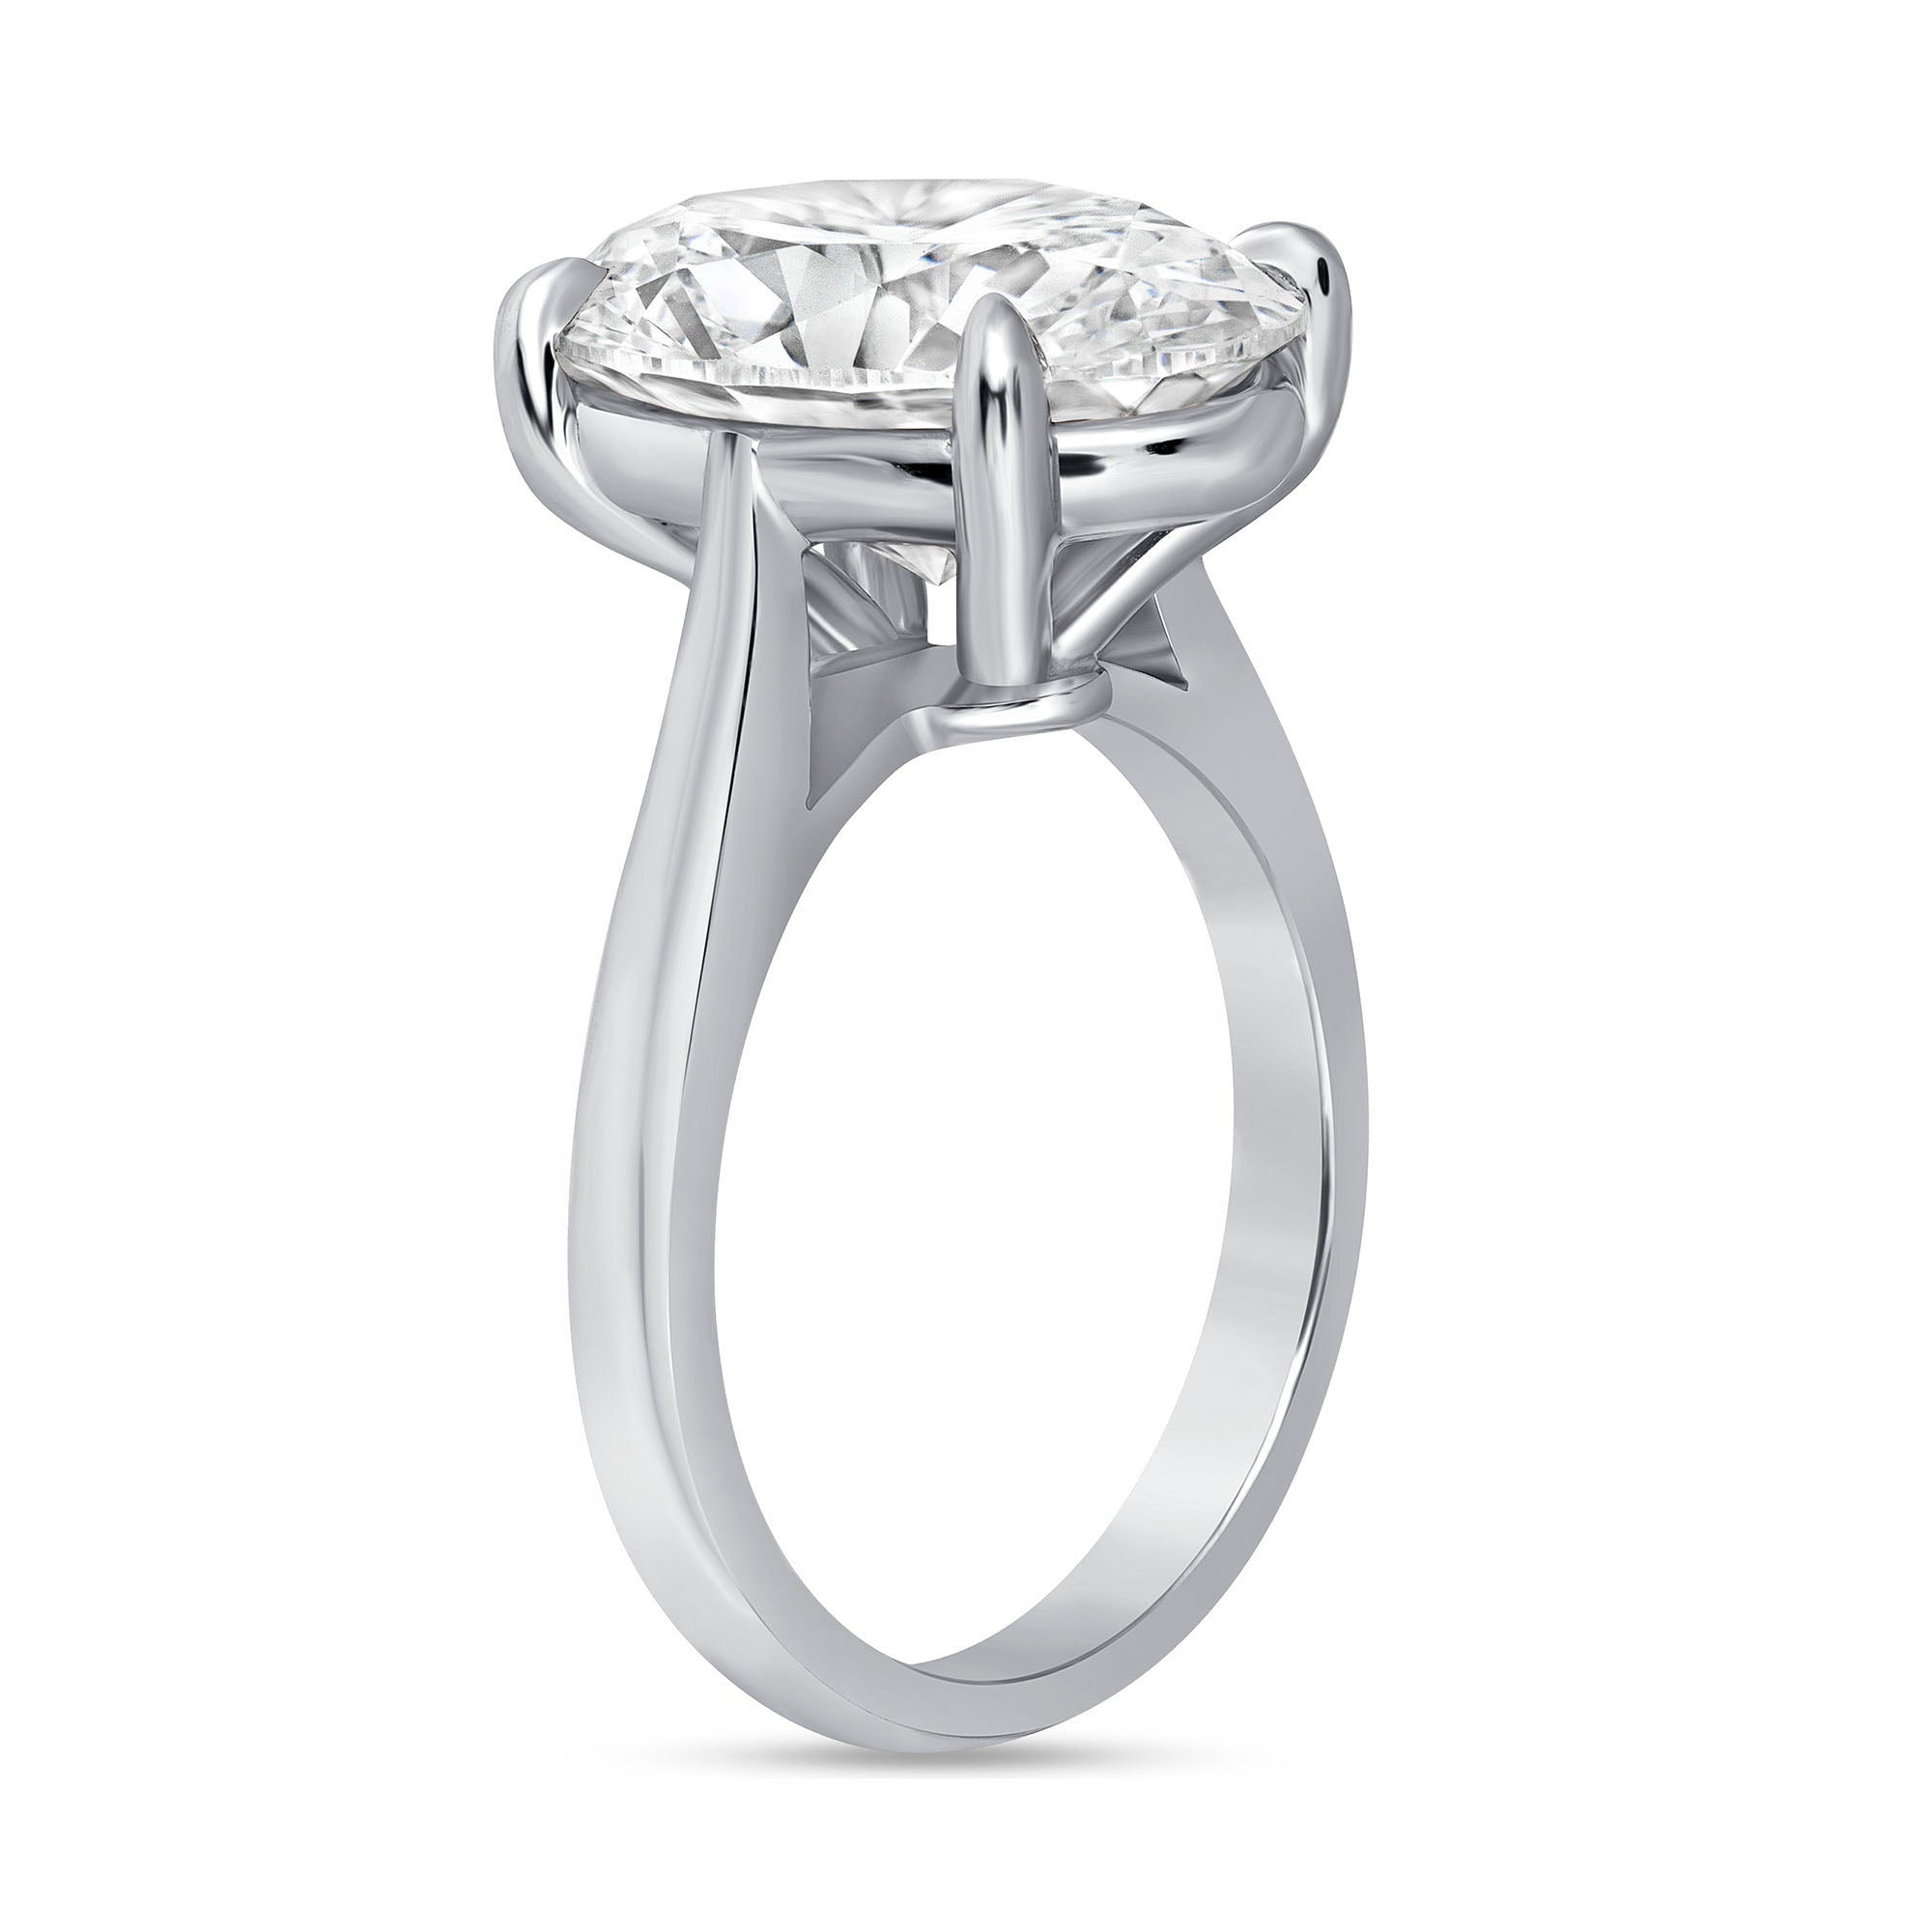 5.5 CT. Oval Cut Diamond Solitaire Ring in 18K White Gold